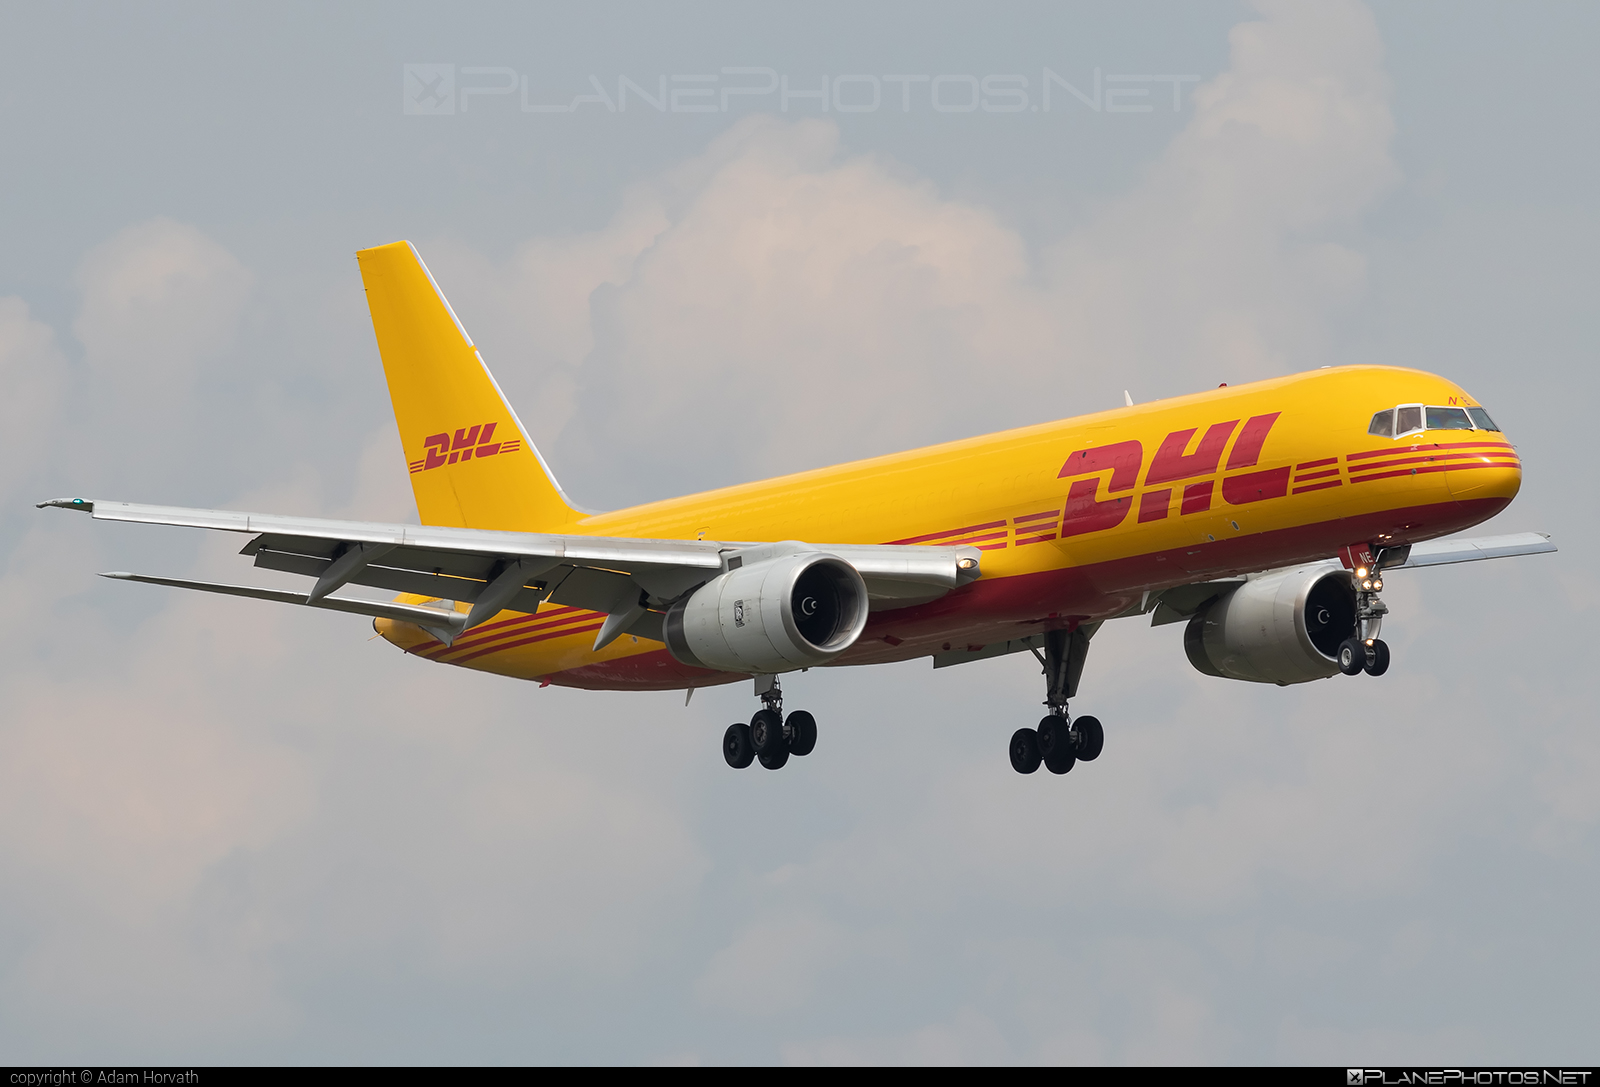 Boeing 757-200PCF - OE-LNE operated by DHL Air #b757 #b757200pcf #b757pcf #boeing #boeing757 #boeing757200pcf #boeing757pcf #dhl #dhlair